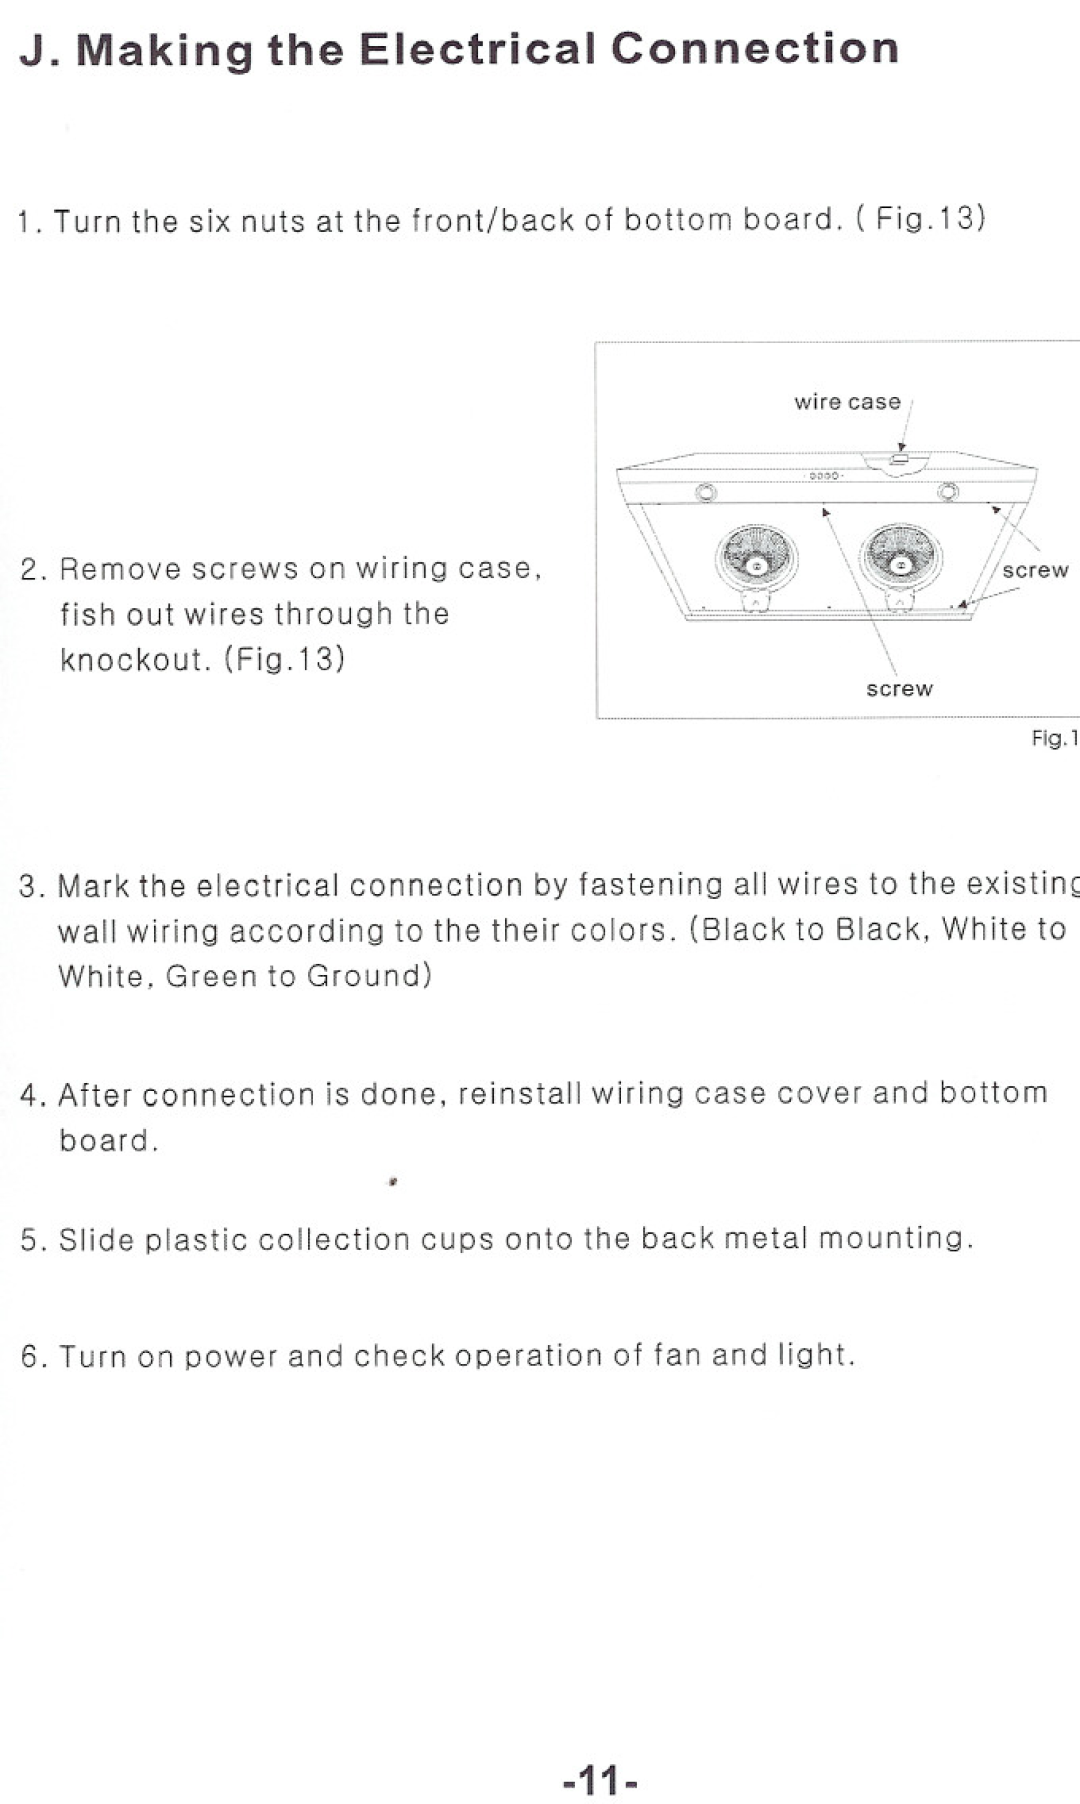 Windster RA.3130/3136, RA.3030/3036 operation manual J. Making the Electrical Connection, screw 